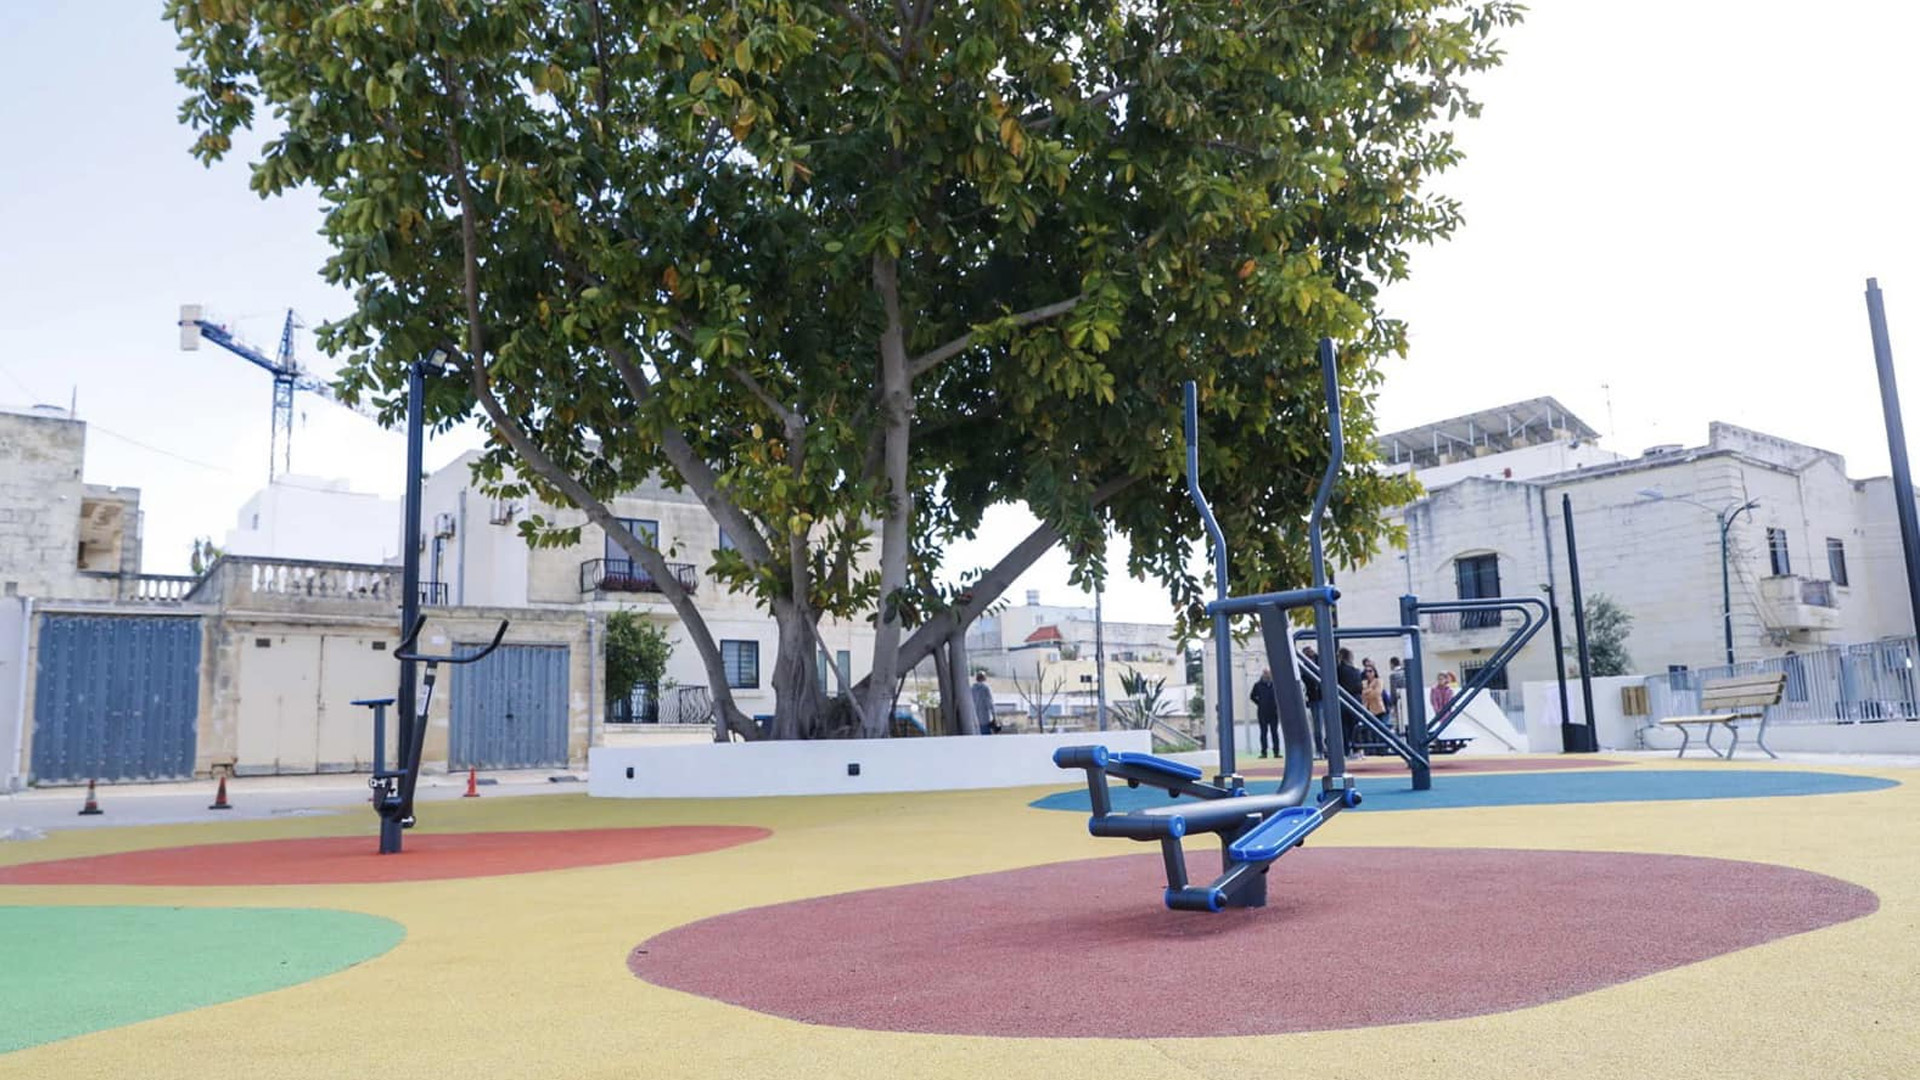 Outdoor Gyms & Playing Fields: Recreational Spaces for the Whole Family